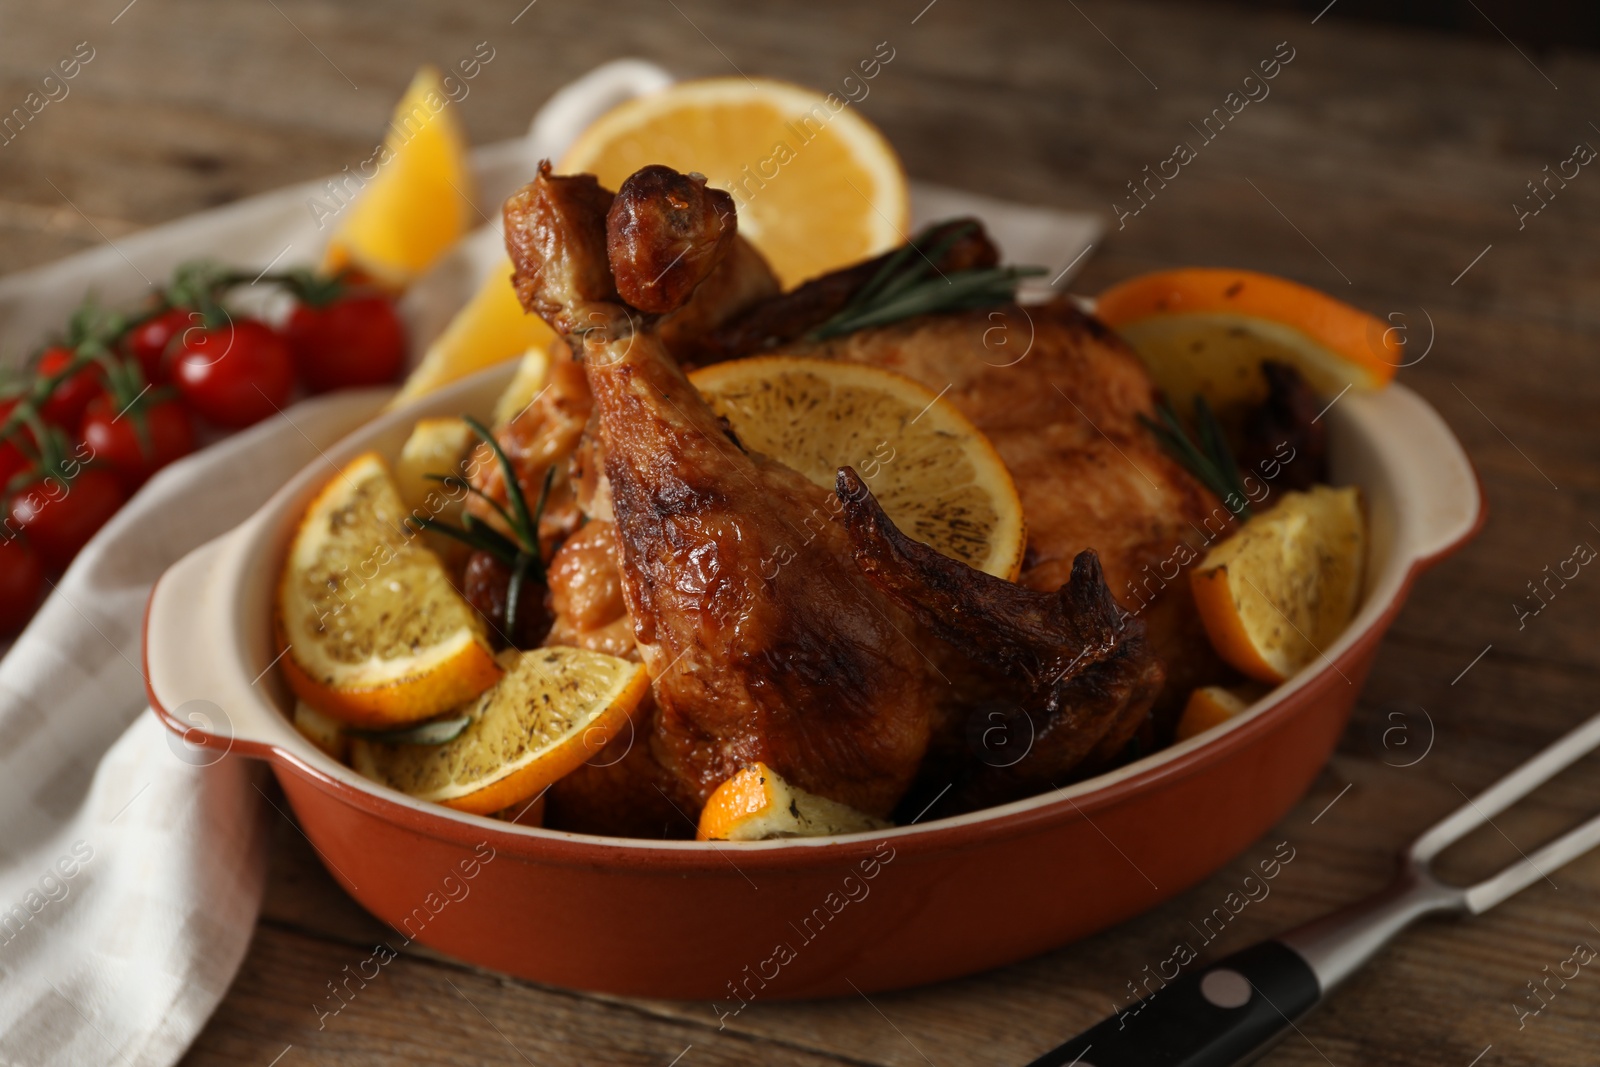 Photo of Baked chicken with orange slices on wooden table